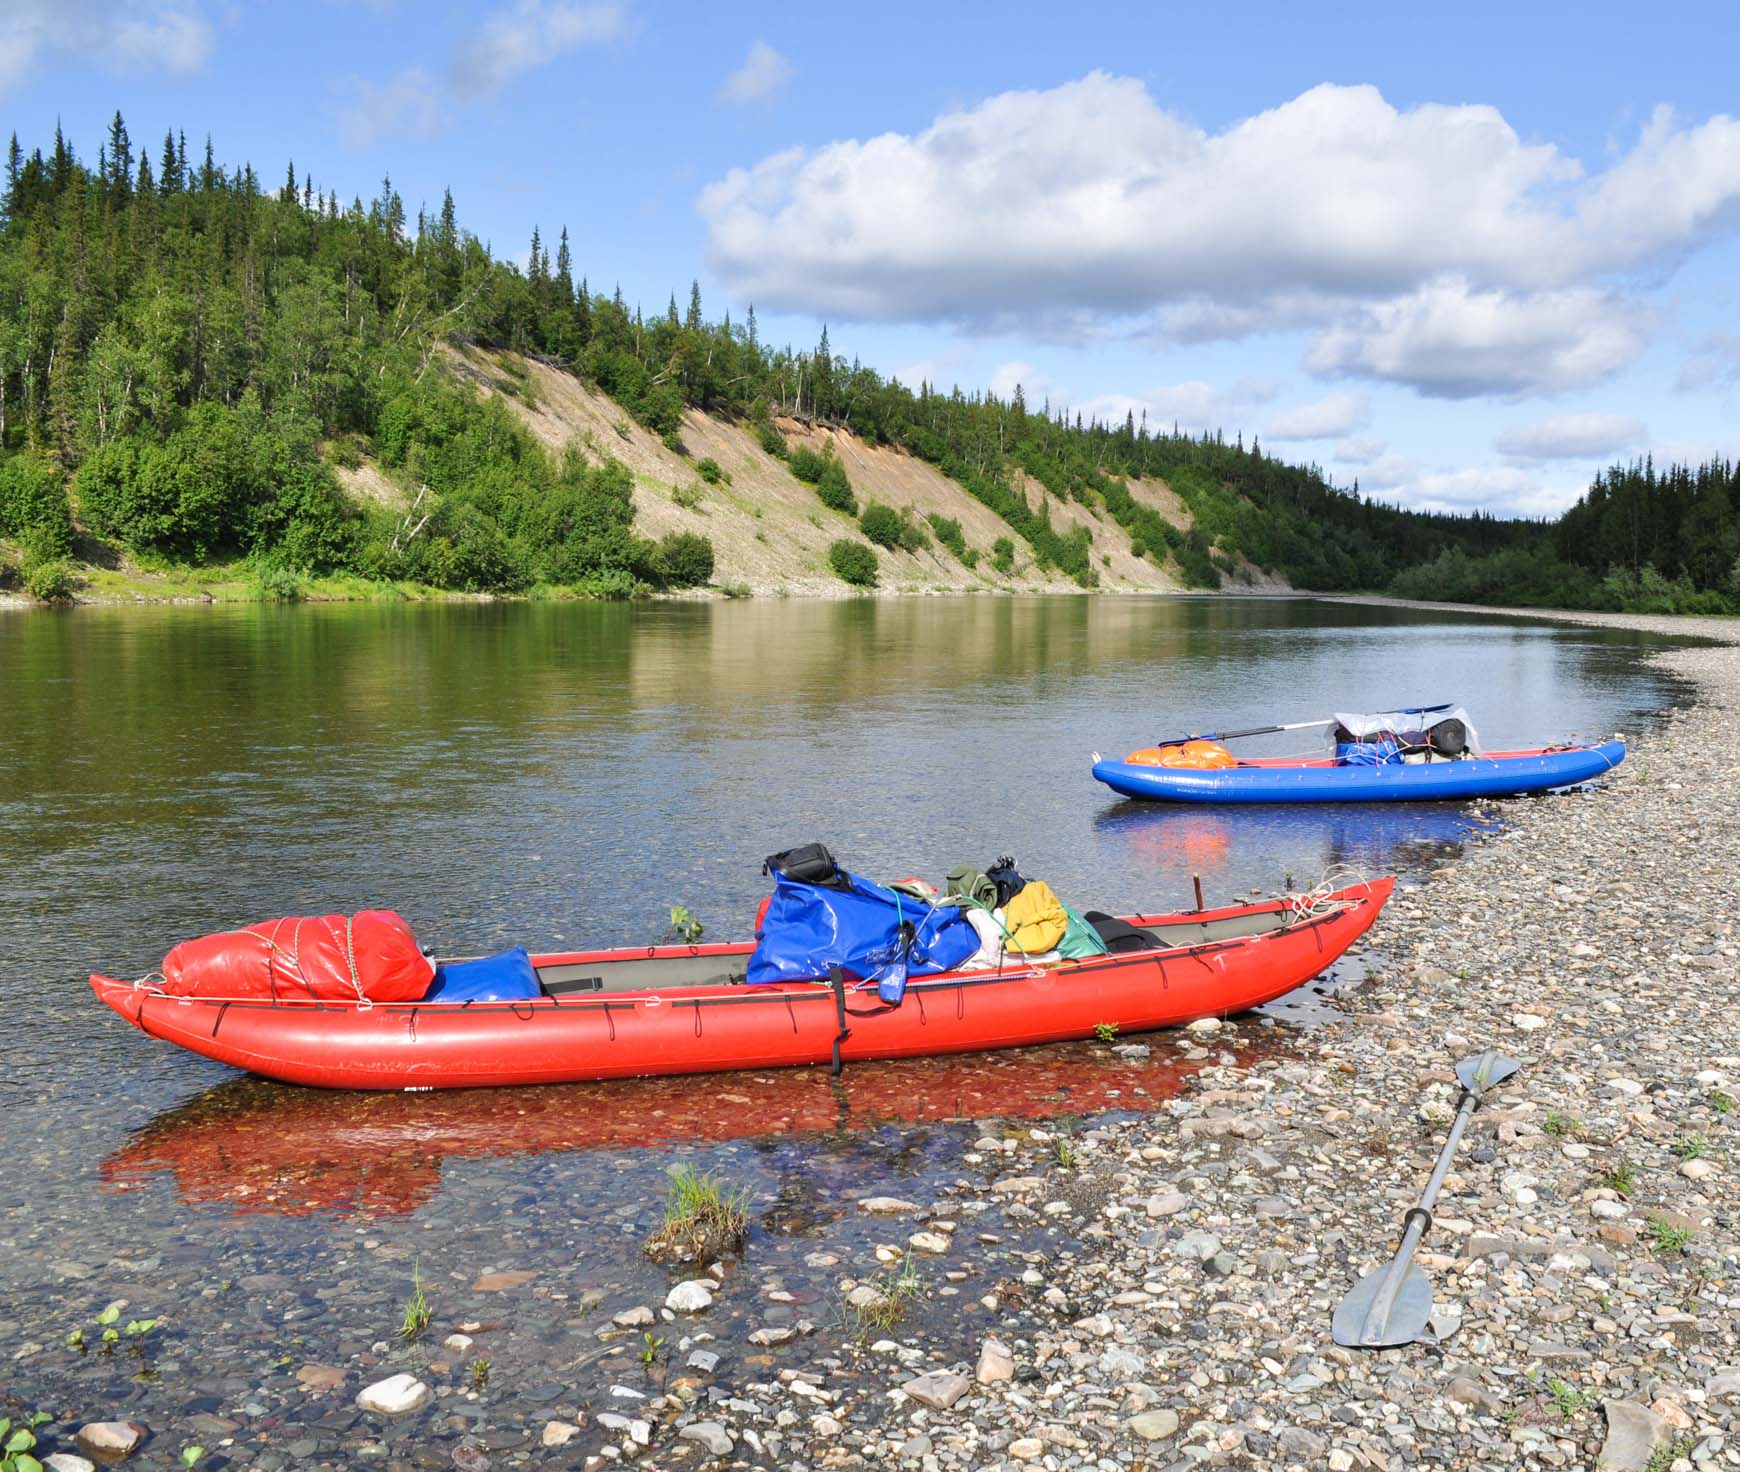 A red kayak and a blue kayak at the shore of a river.